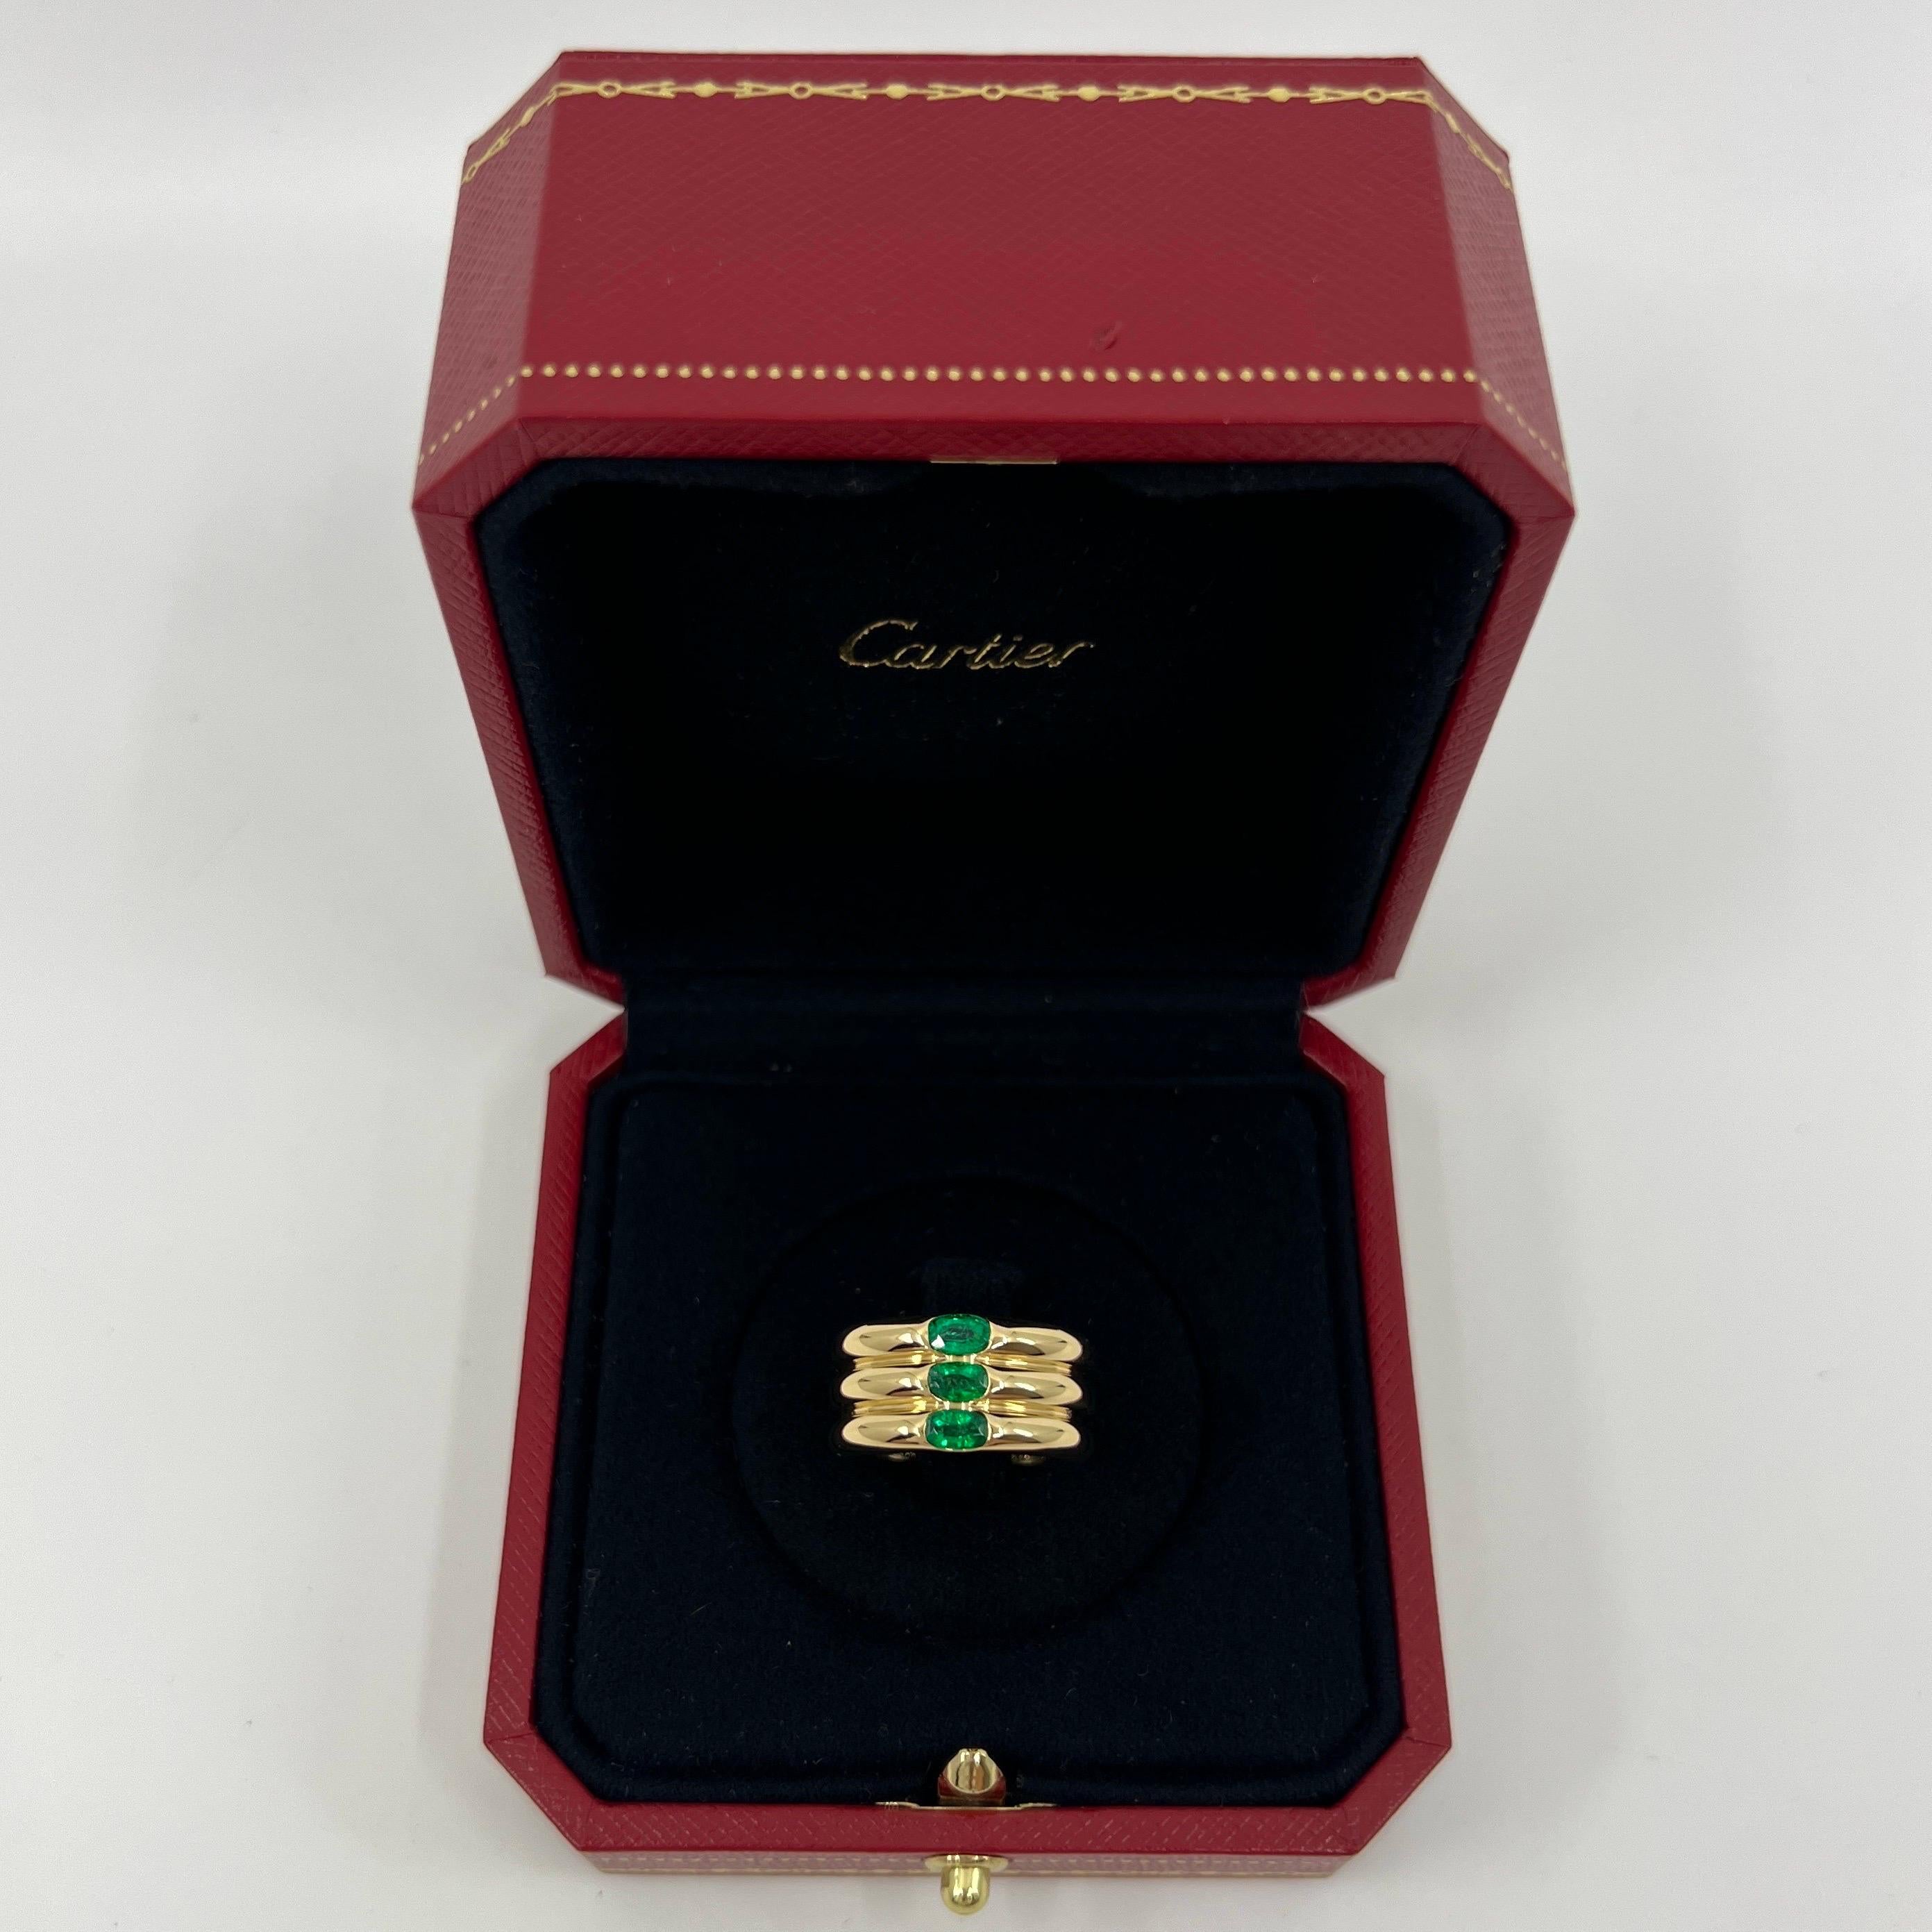 Vintage Cartier Vivid Green Emerald 18k Yellow Gold Three Stone Band Ring.

Stunning yellow gold Cartier ring set with a three fine vivid green emeralds. Fine jewellery houses like Cartier only use the finest of gemstones and these emeralds are no